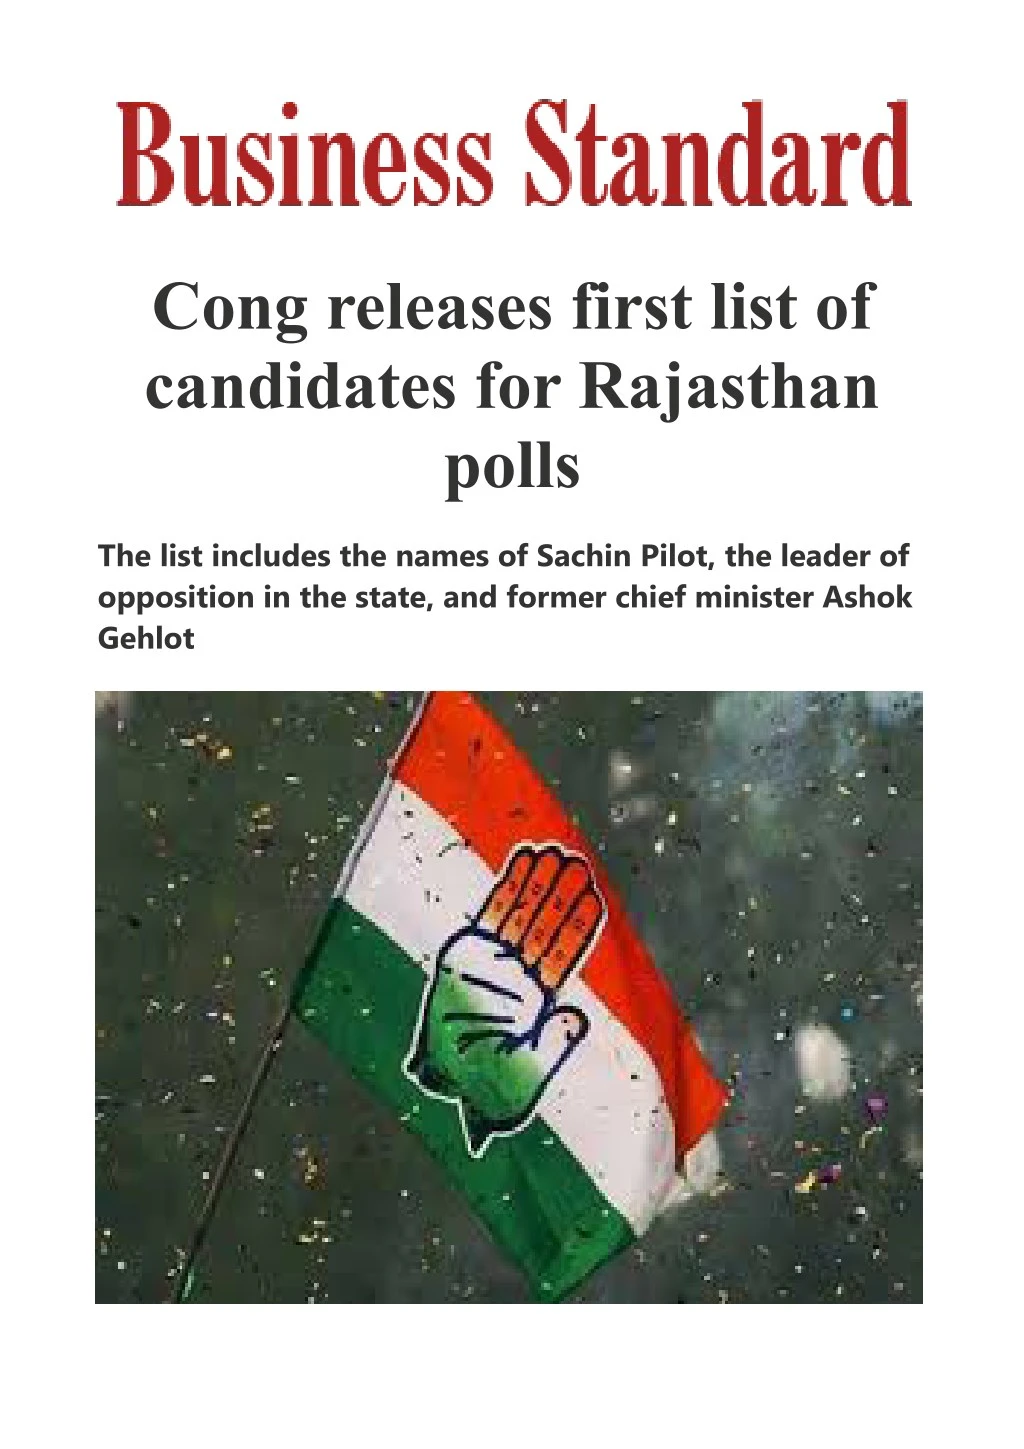 cong releases first list of candidates